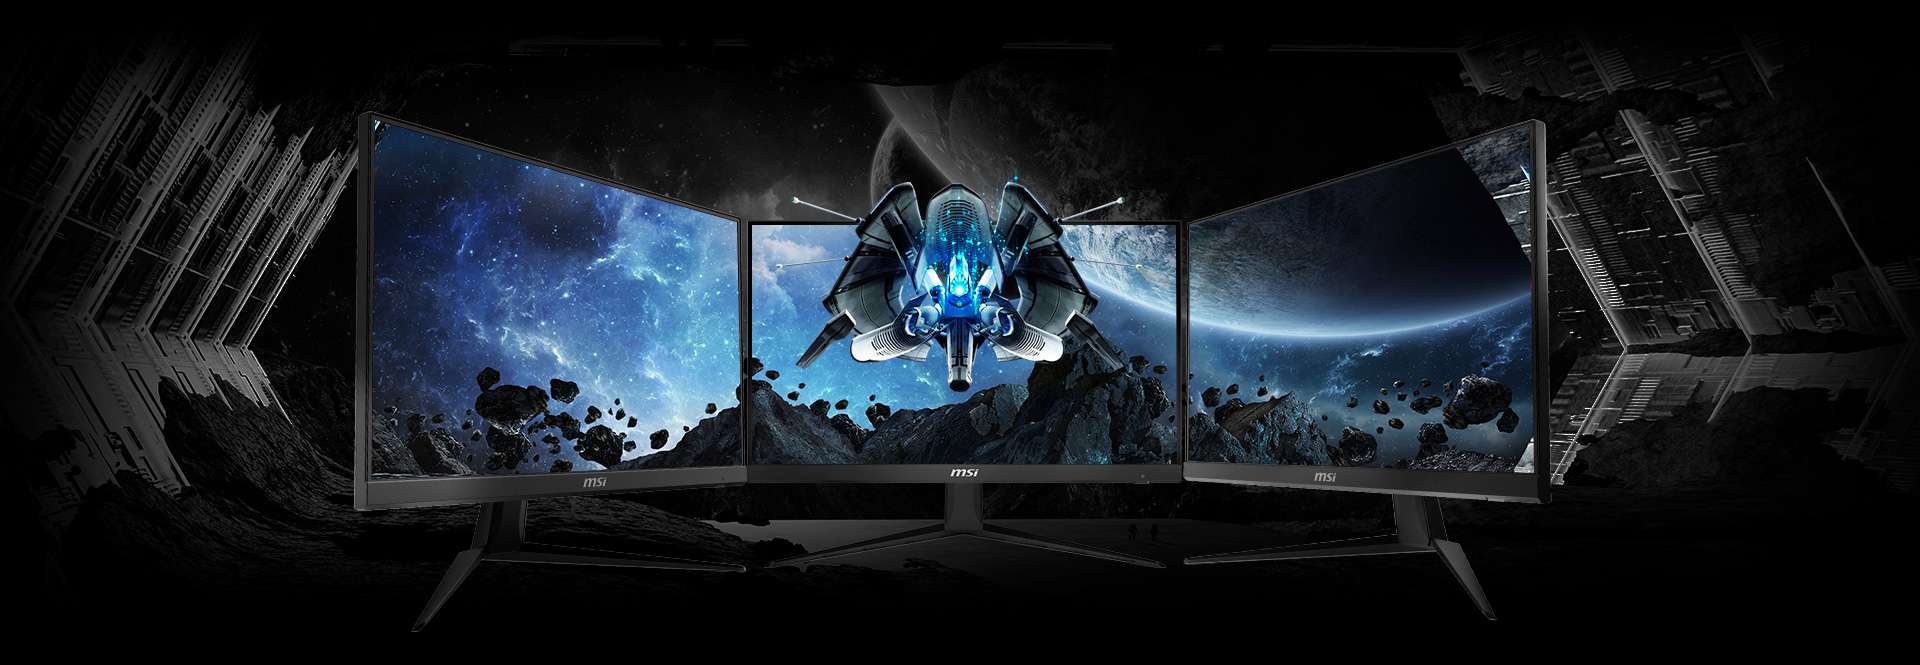 three monitors link together and a spaceship image crossing them